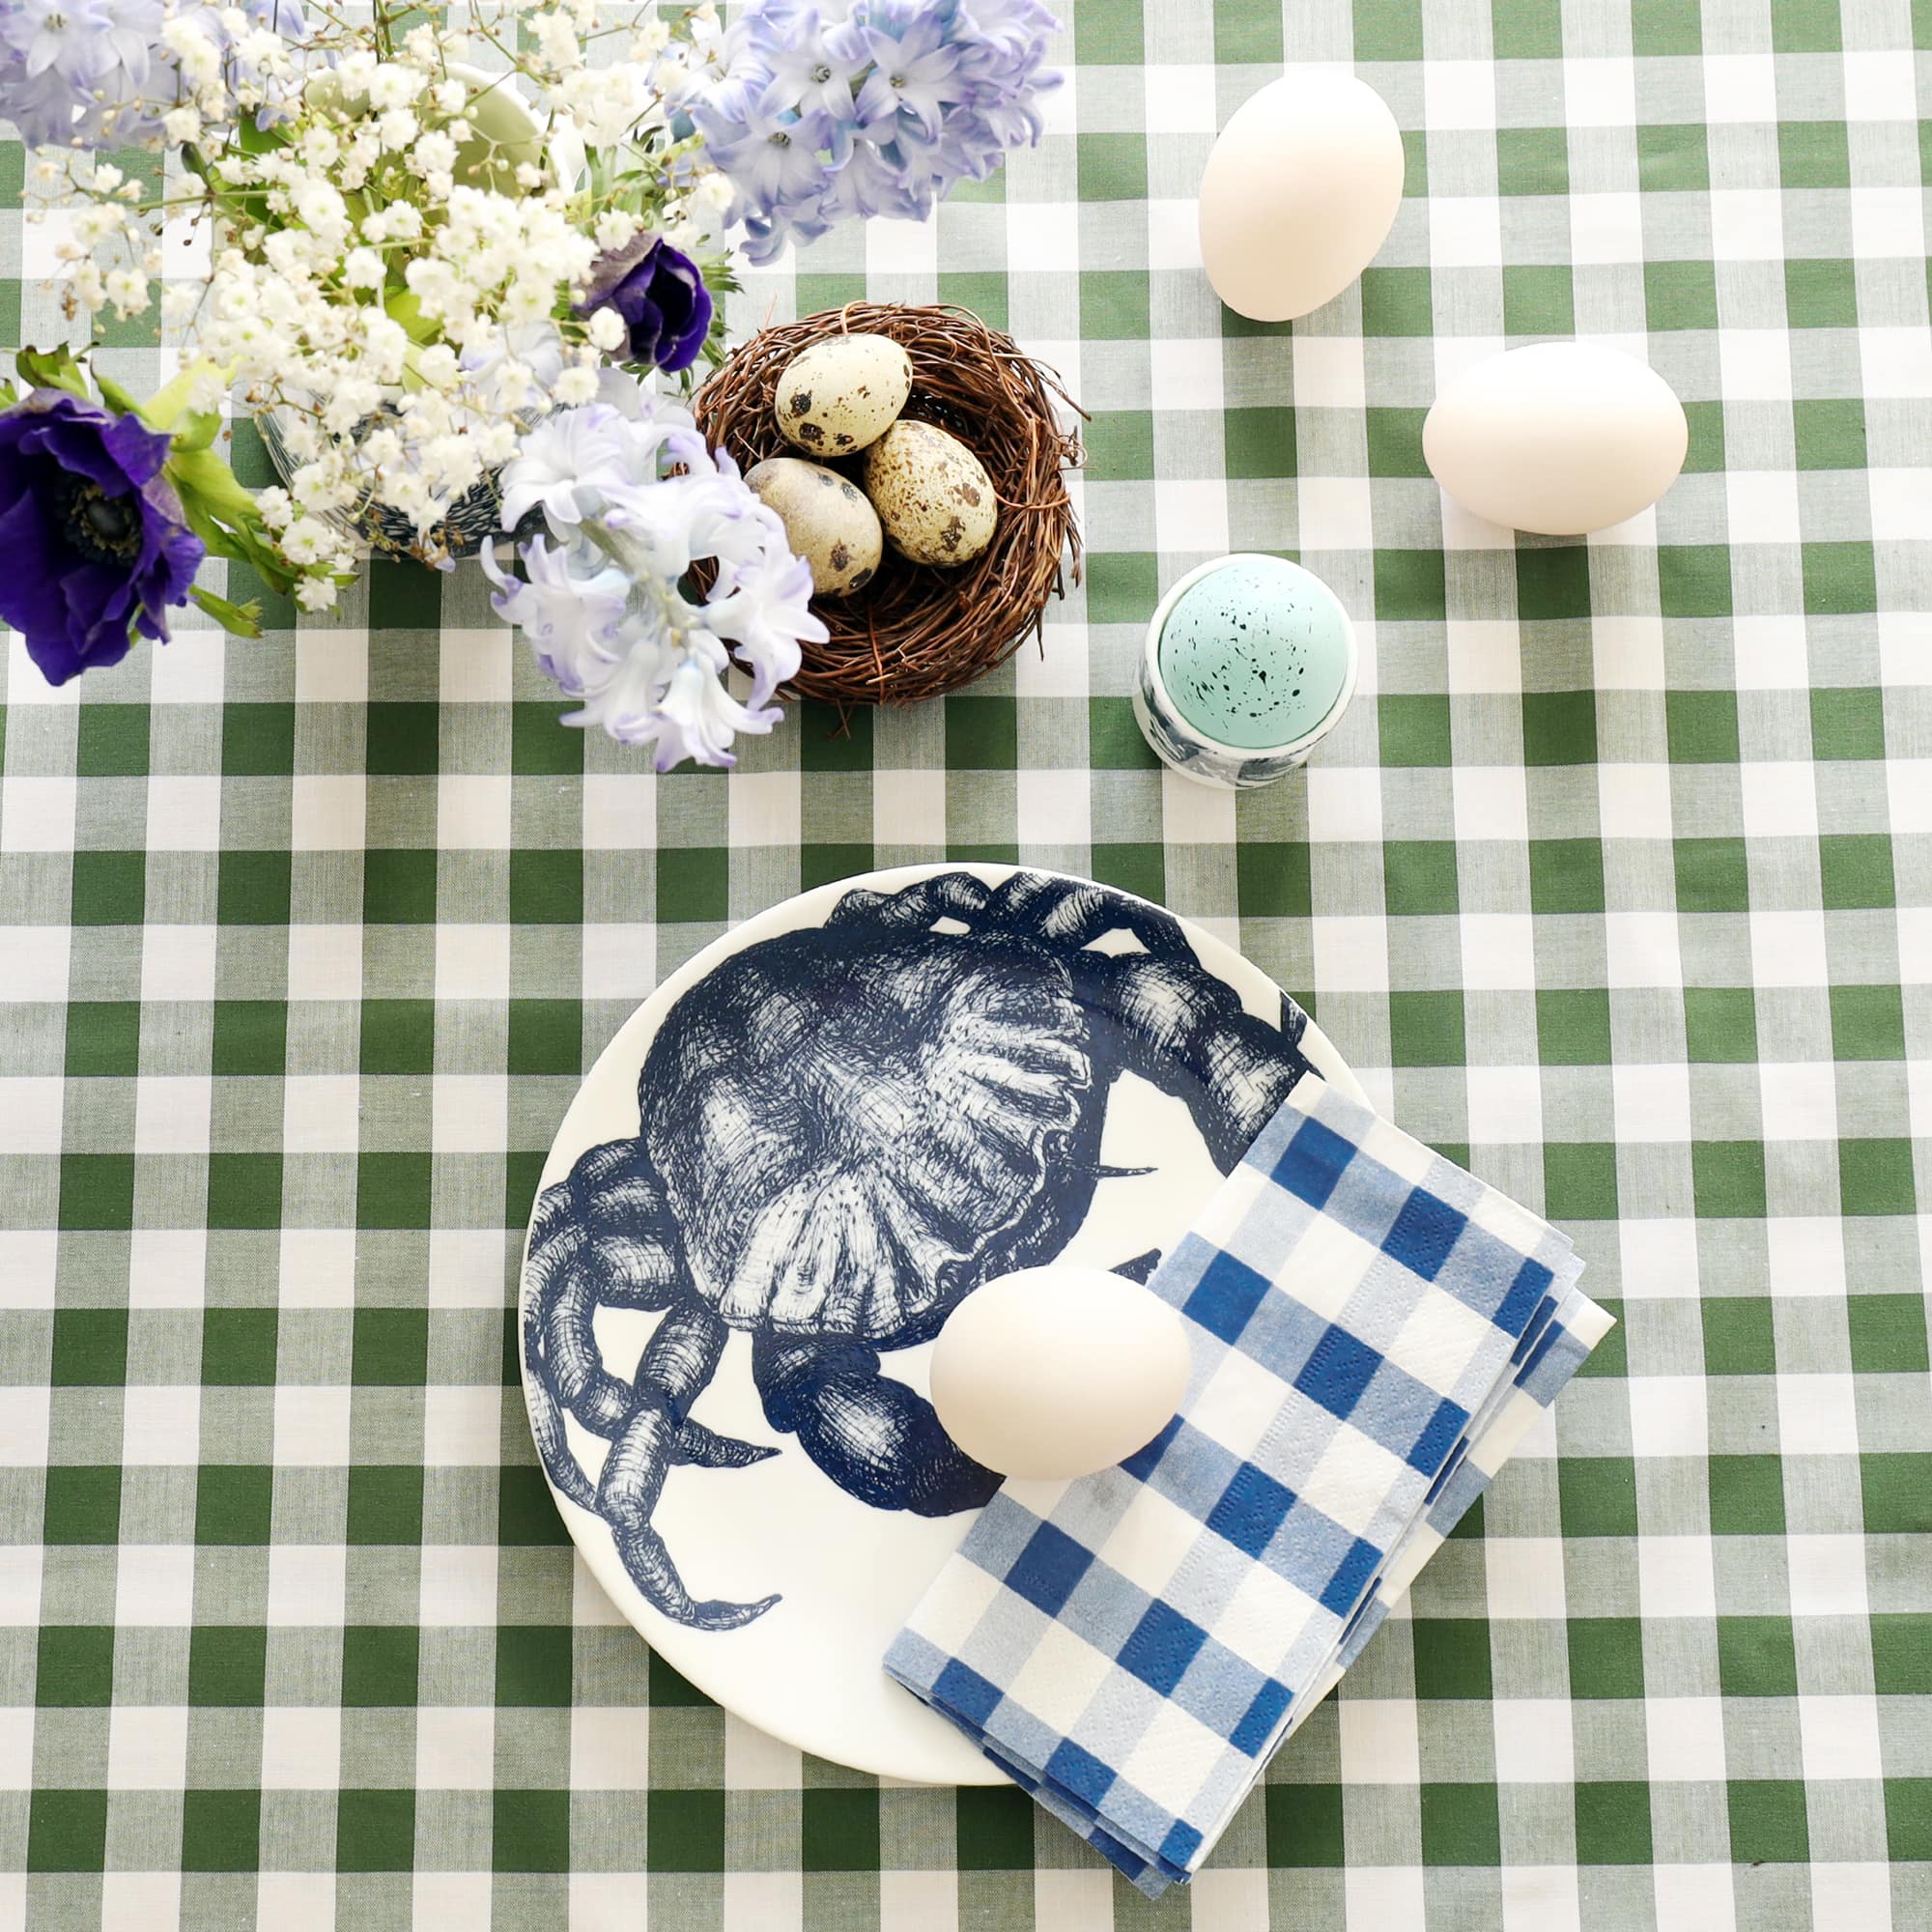 White plate with navy blue crab decoration with folded blue gingham napkin and duck egg on it. This is on a green gingham tablecloth with a small nest and quails eggs, hyacinths and anemones and more eggs.